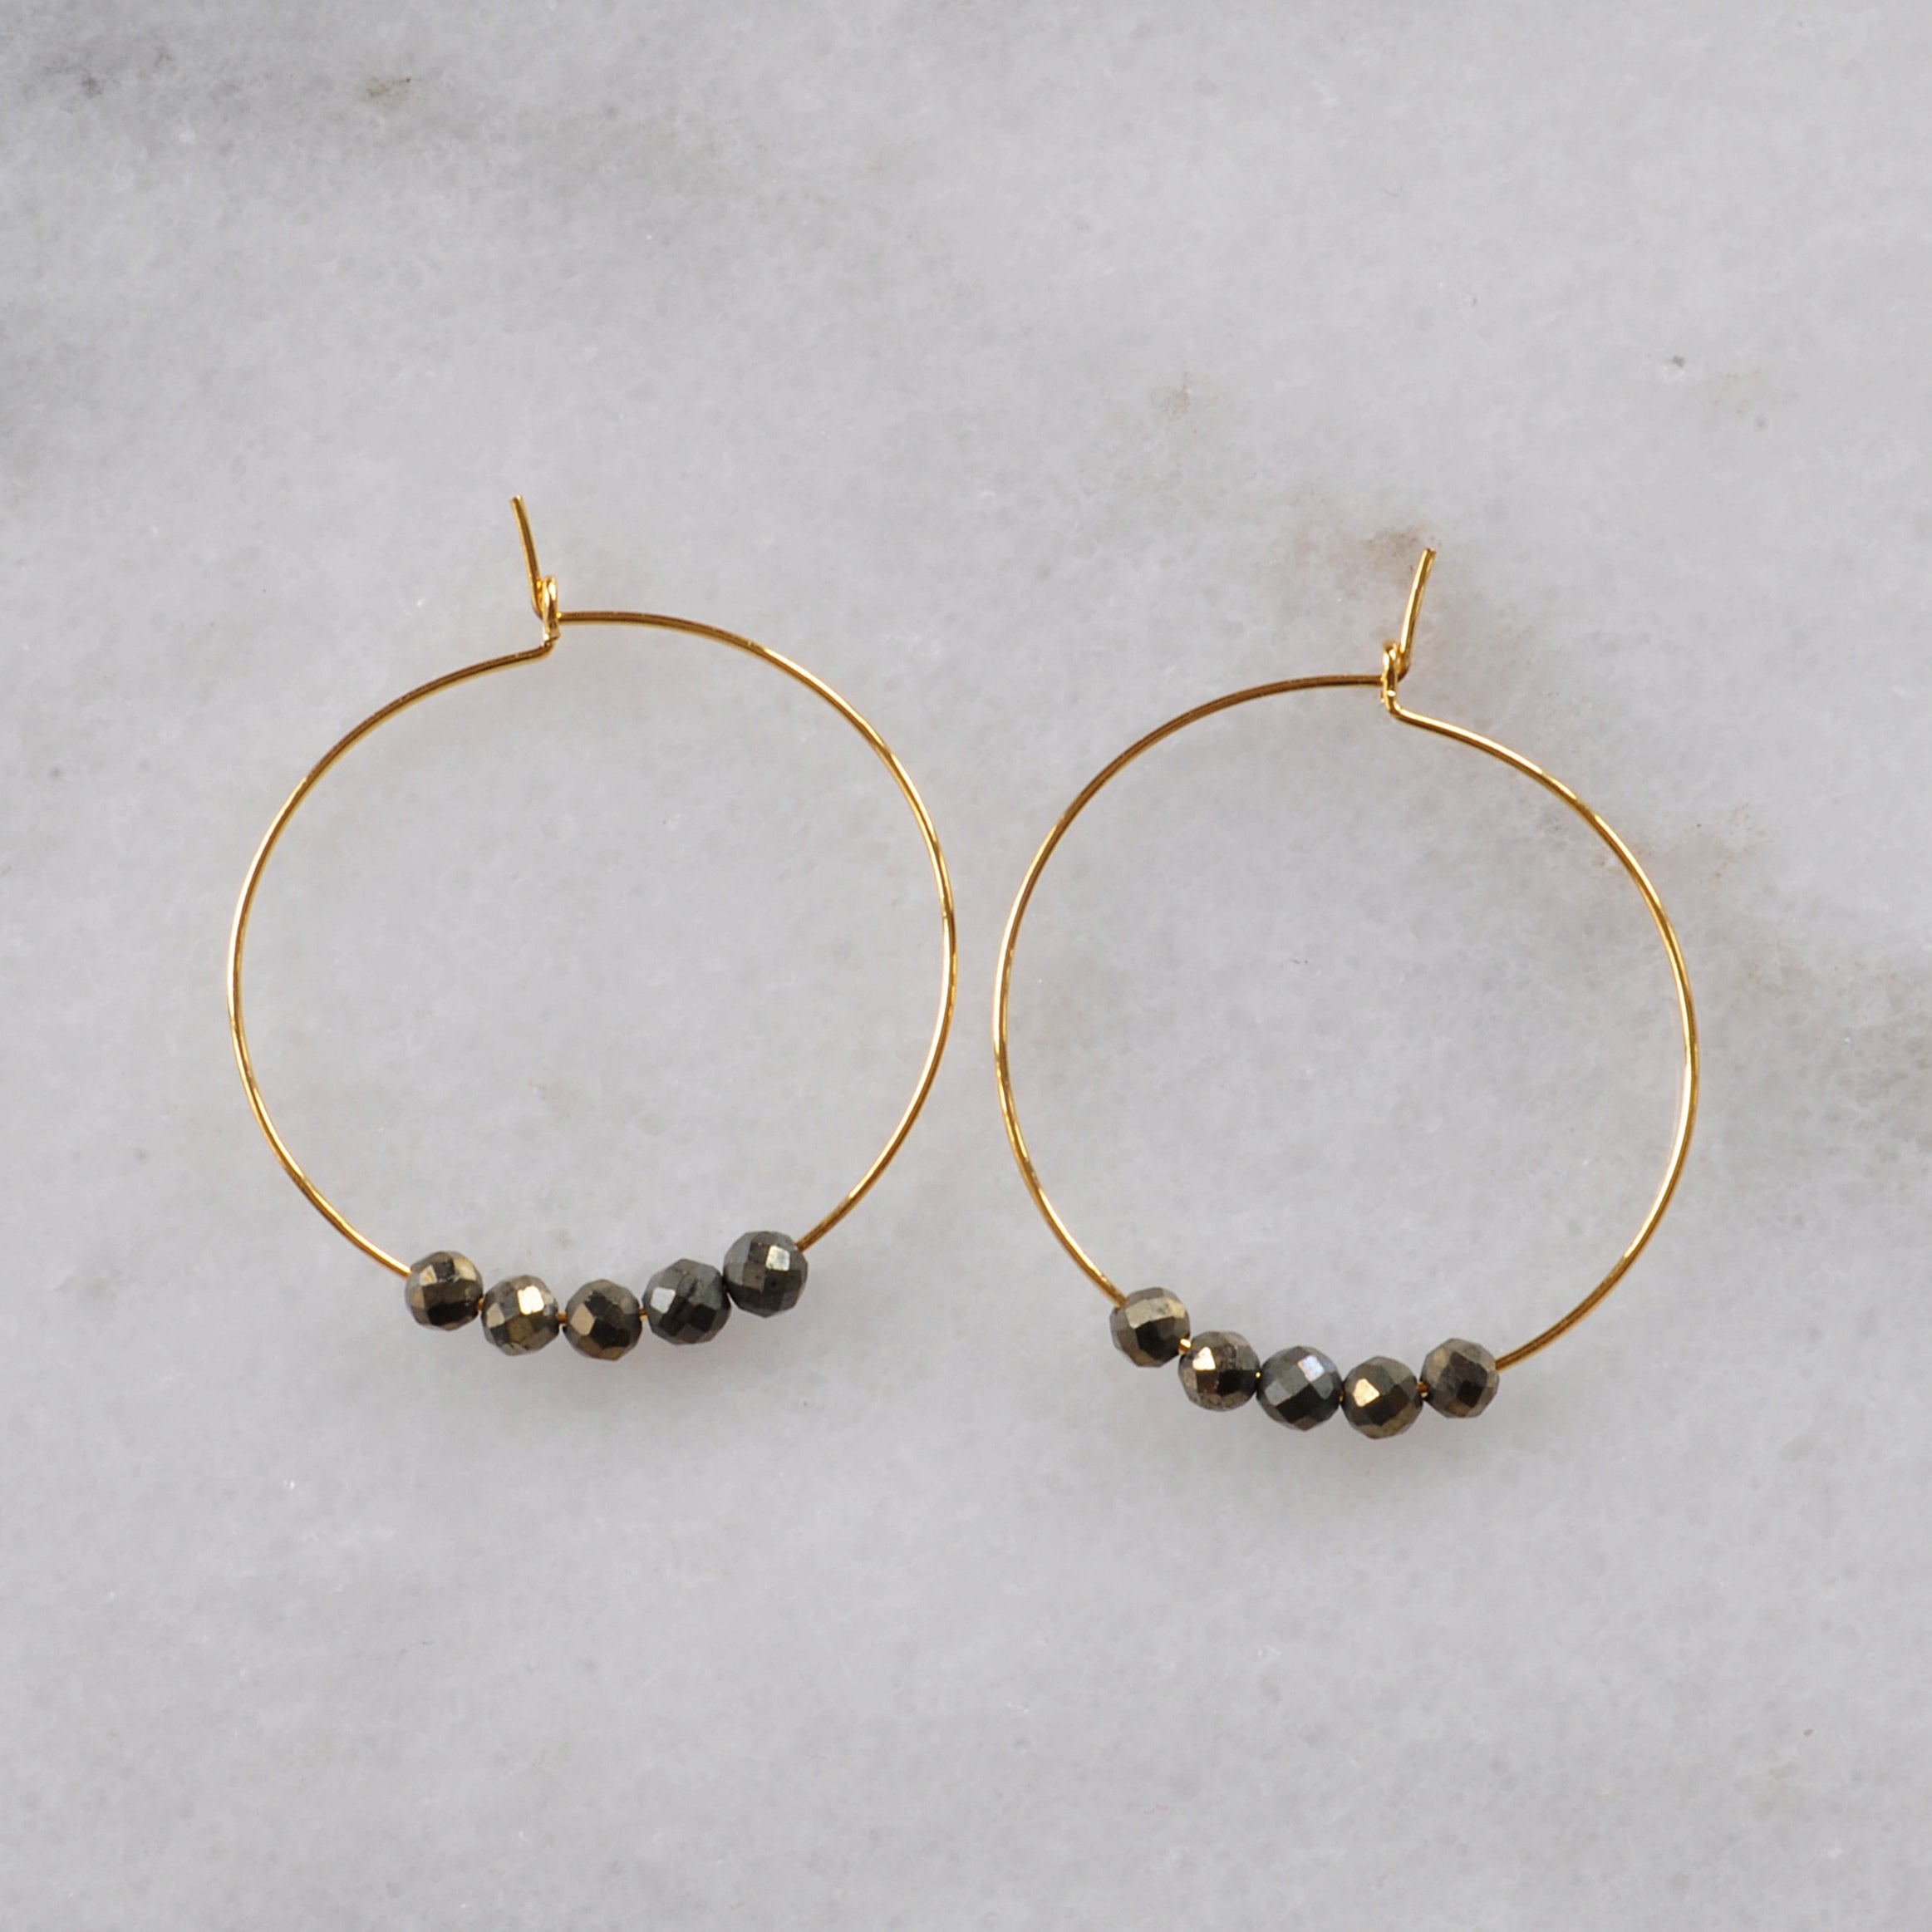 Libby & Smee pyrite gold plated hoops